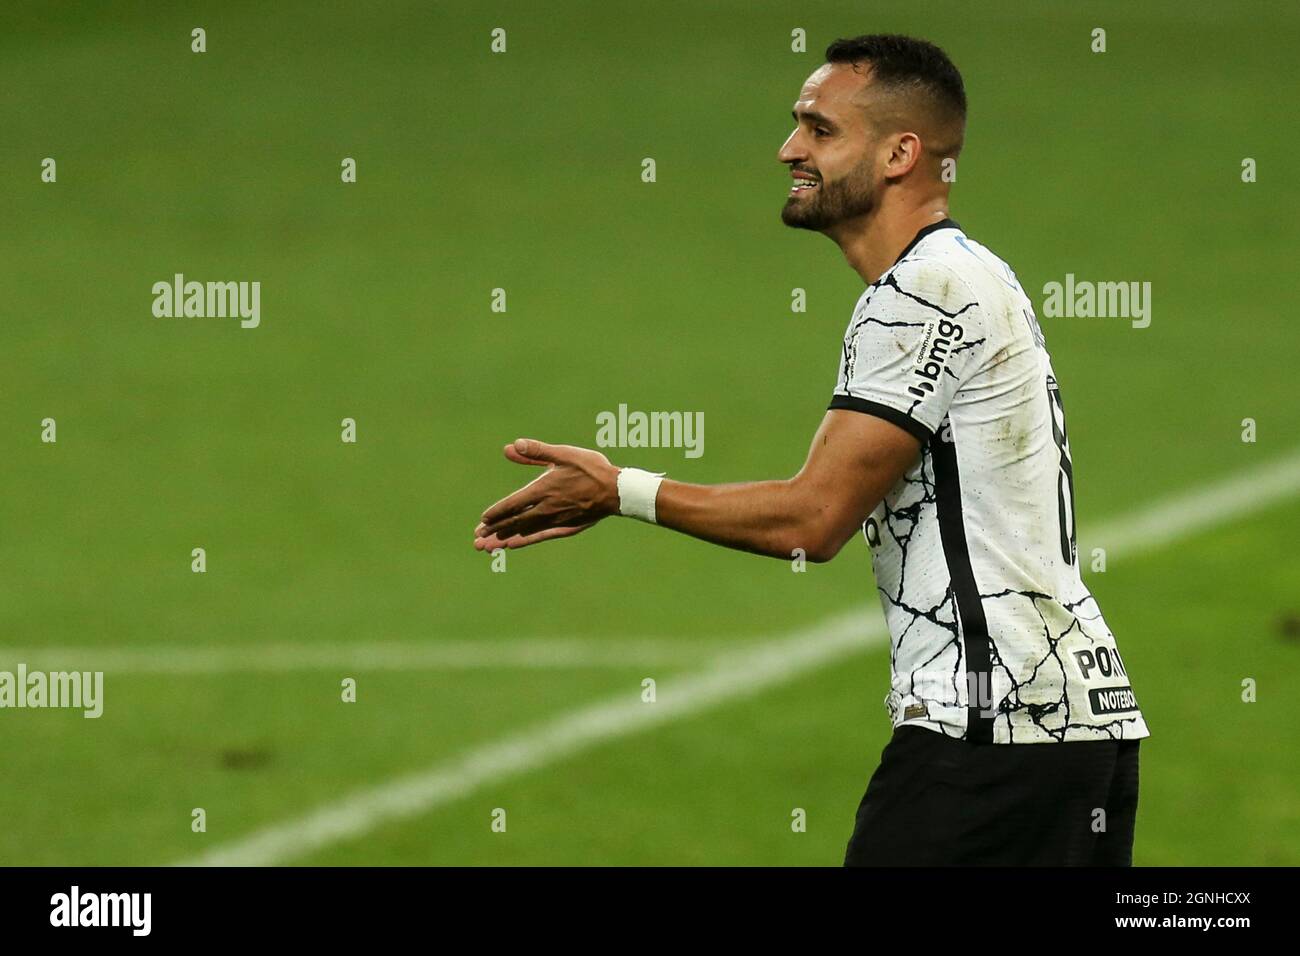 SÃO PAULO, SP - 25.09.2021: CORINTHIANS X PALMEIRAS - Renato Augusto during the game between Corinthians and Palmeiras held at Neo Química Arena in São Paulo, SP. The match is valid for the 22nd round of the Brasileirão 2021. (Photo: Marco Galvão/Fotoarena) Stock Photo